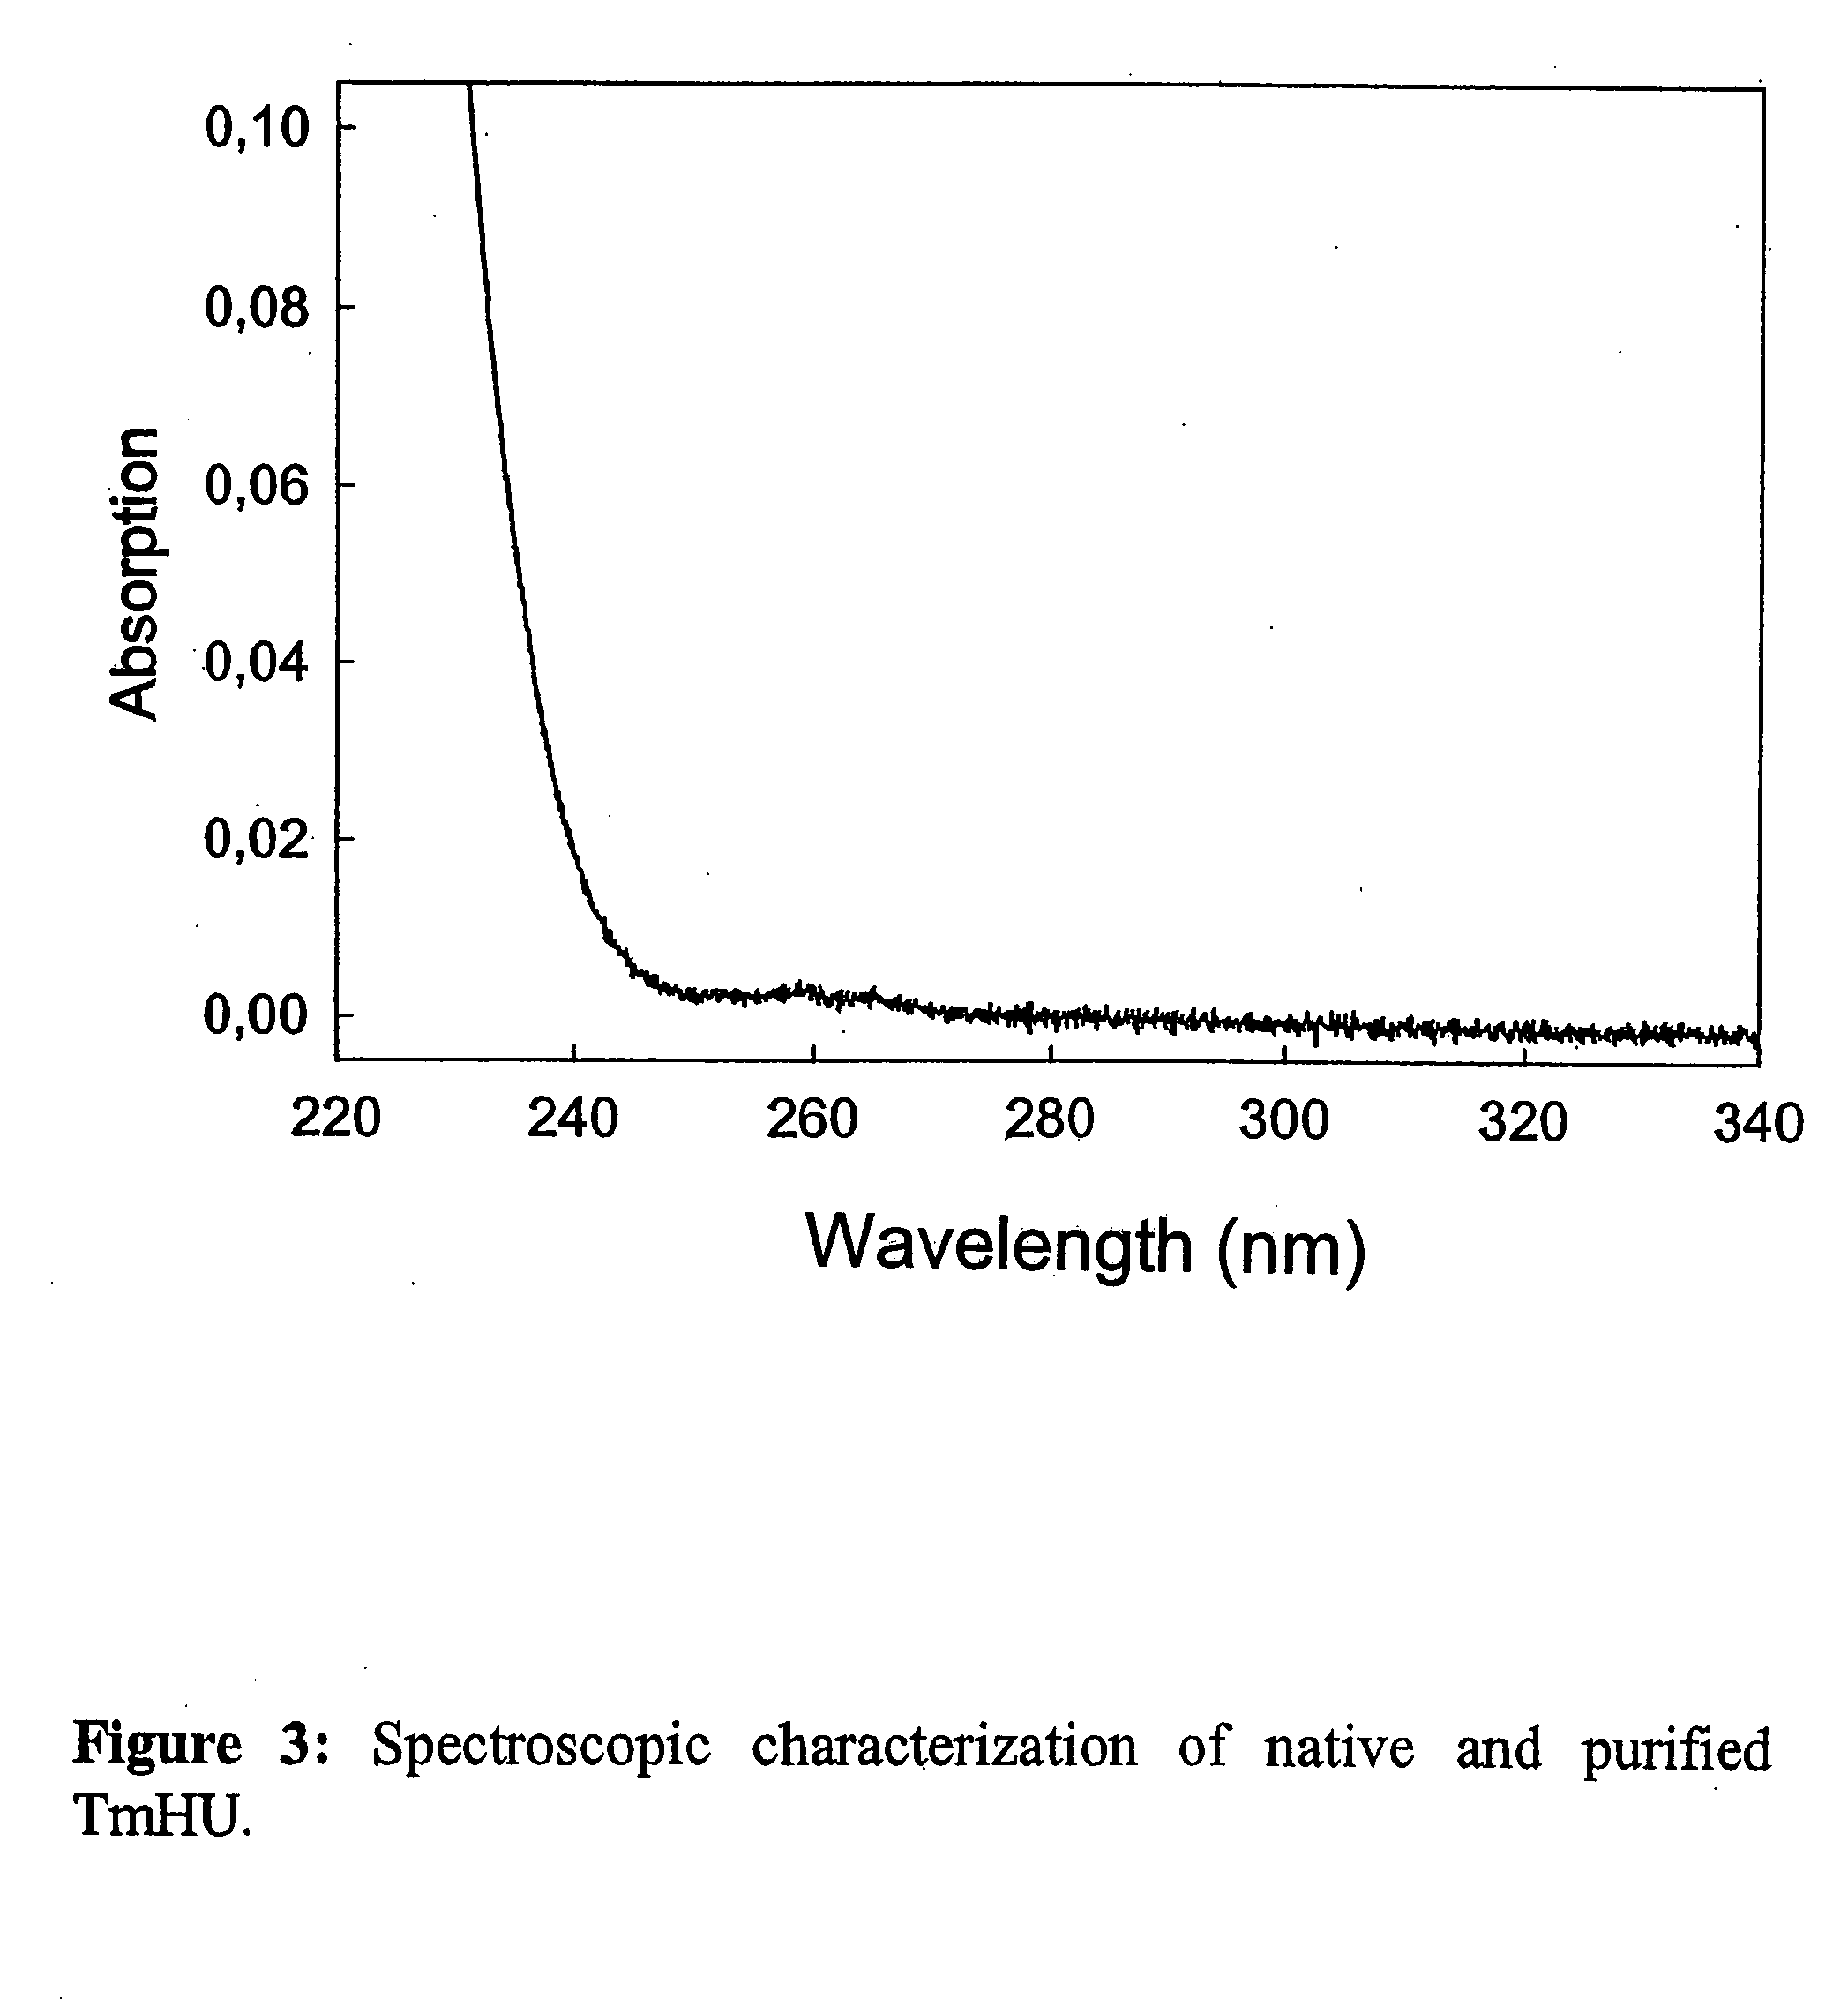 Method for transfer of molecular substances with prokaryontic nucleic acid-binding proteins